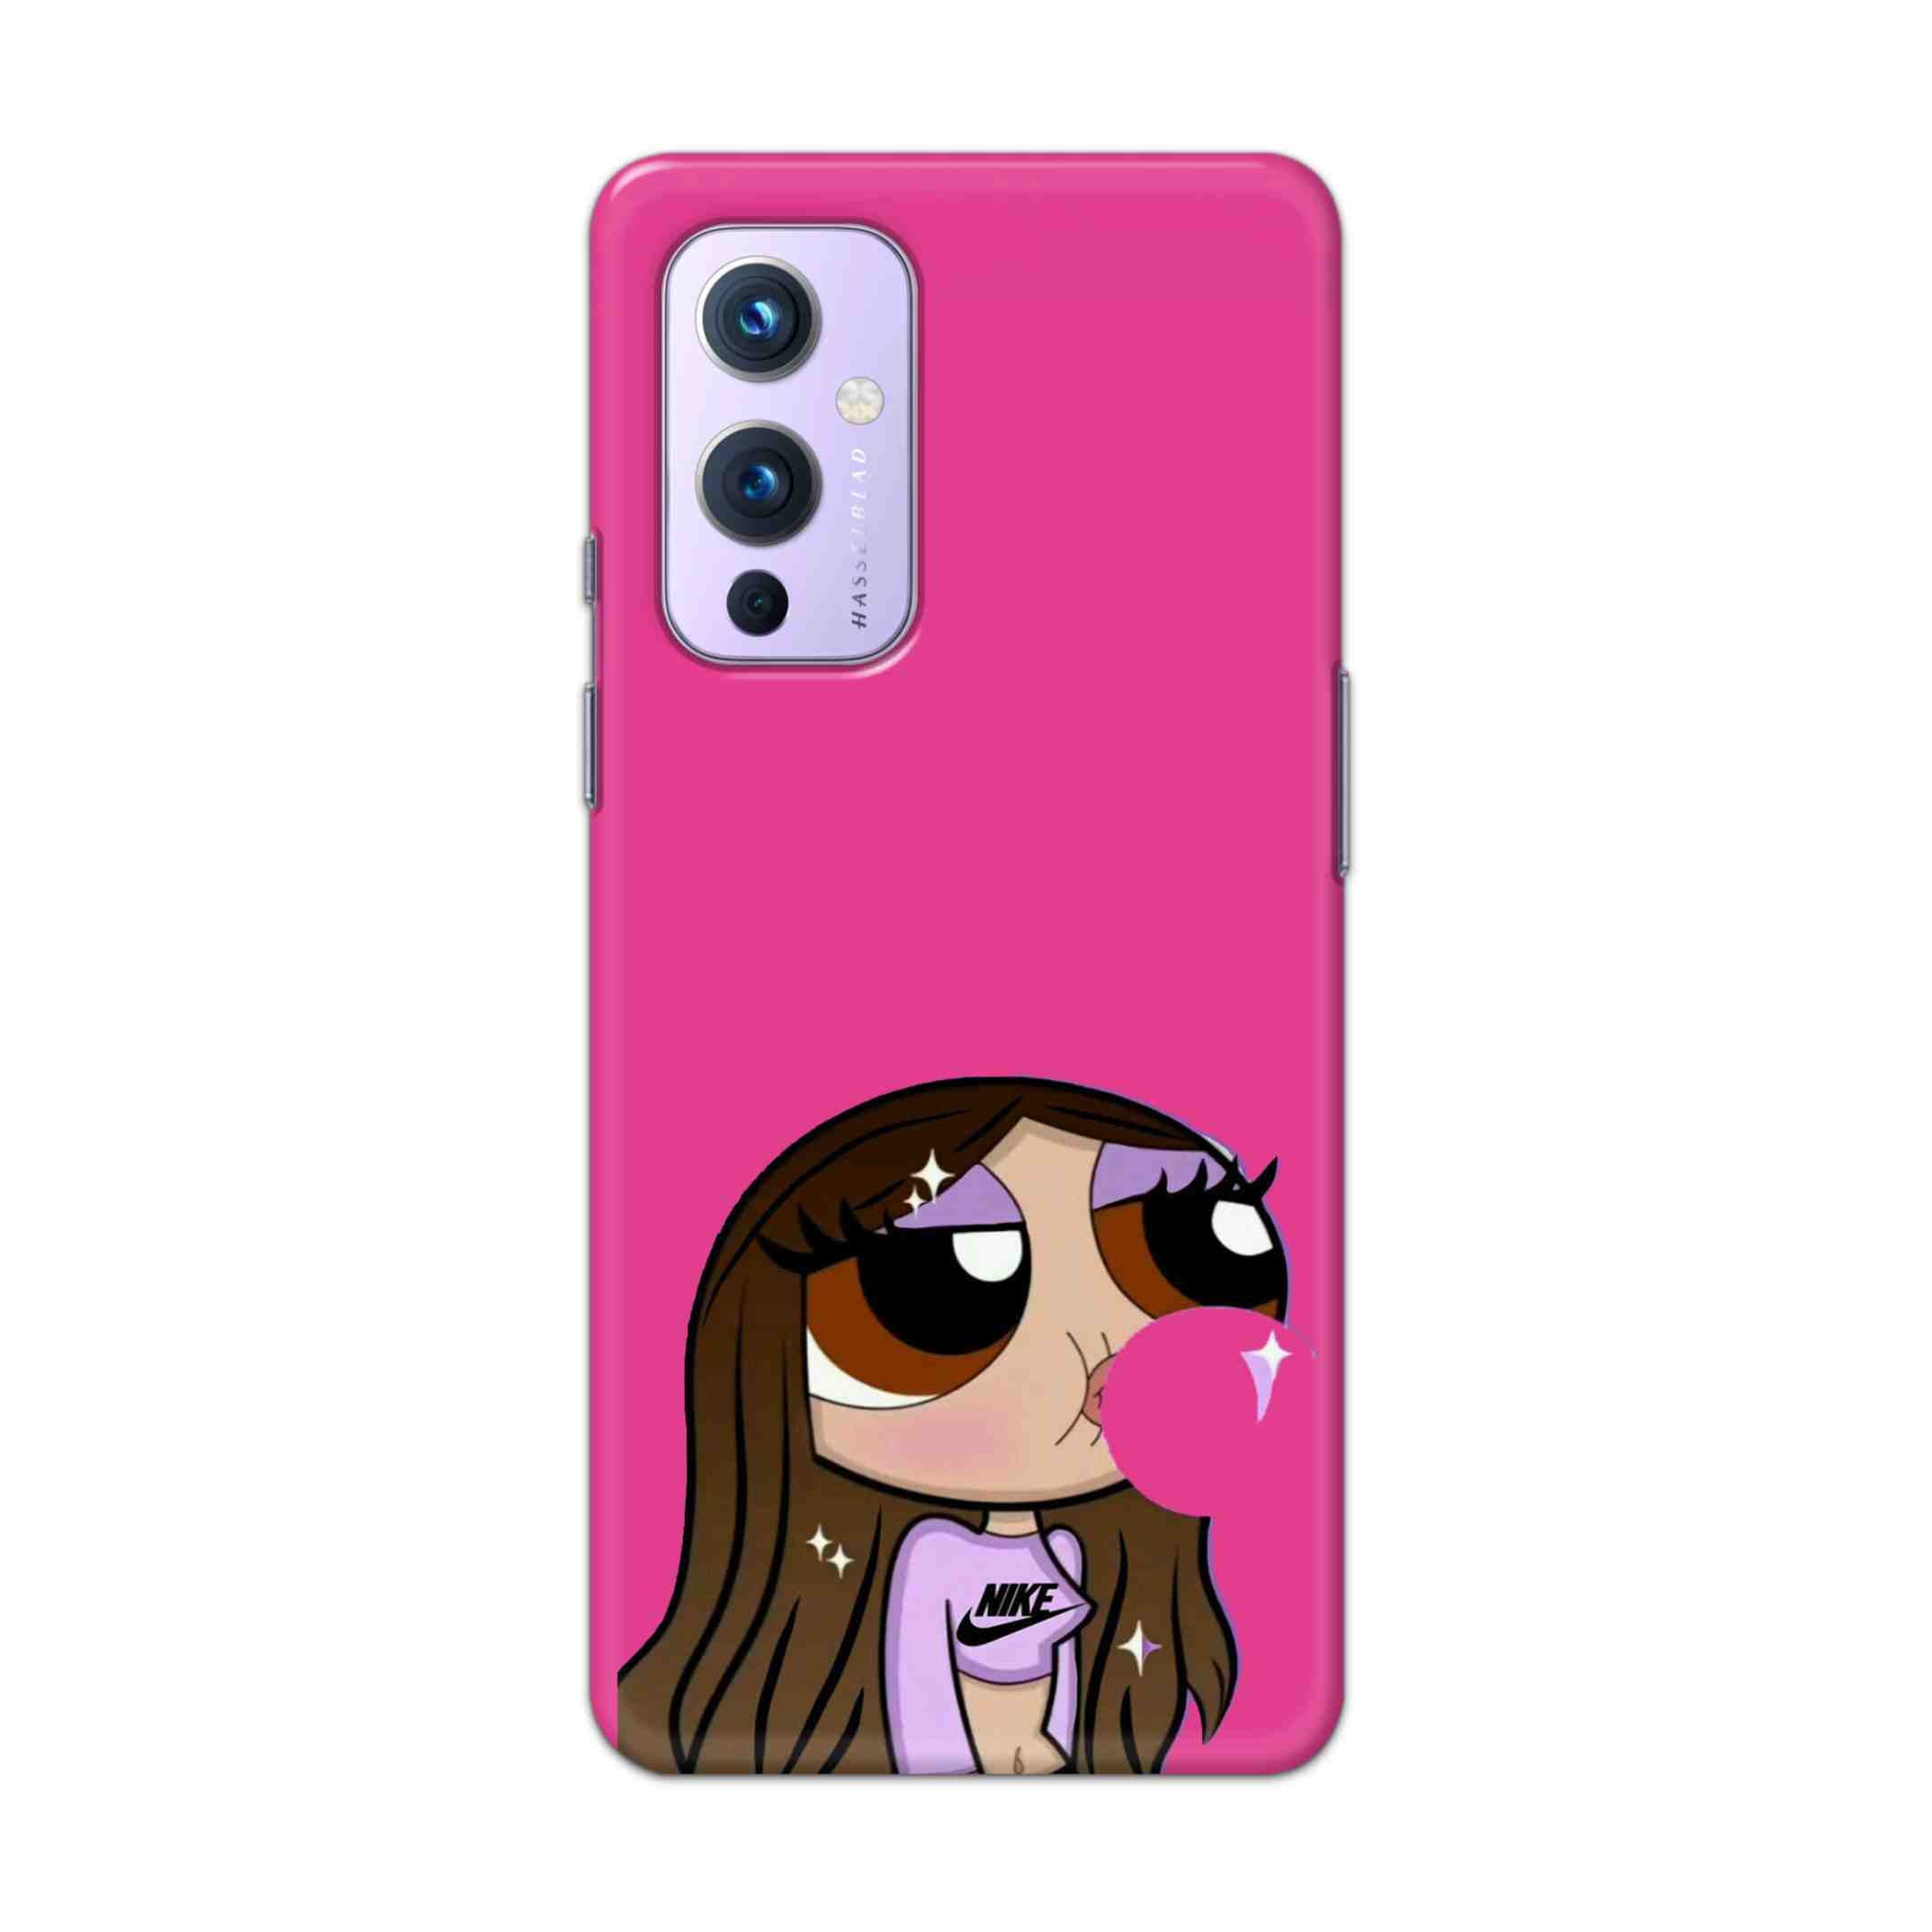 Buy Bubble Girl Hard Back Mobile Phone Case Cover For OnePlus 9 Online